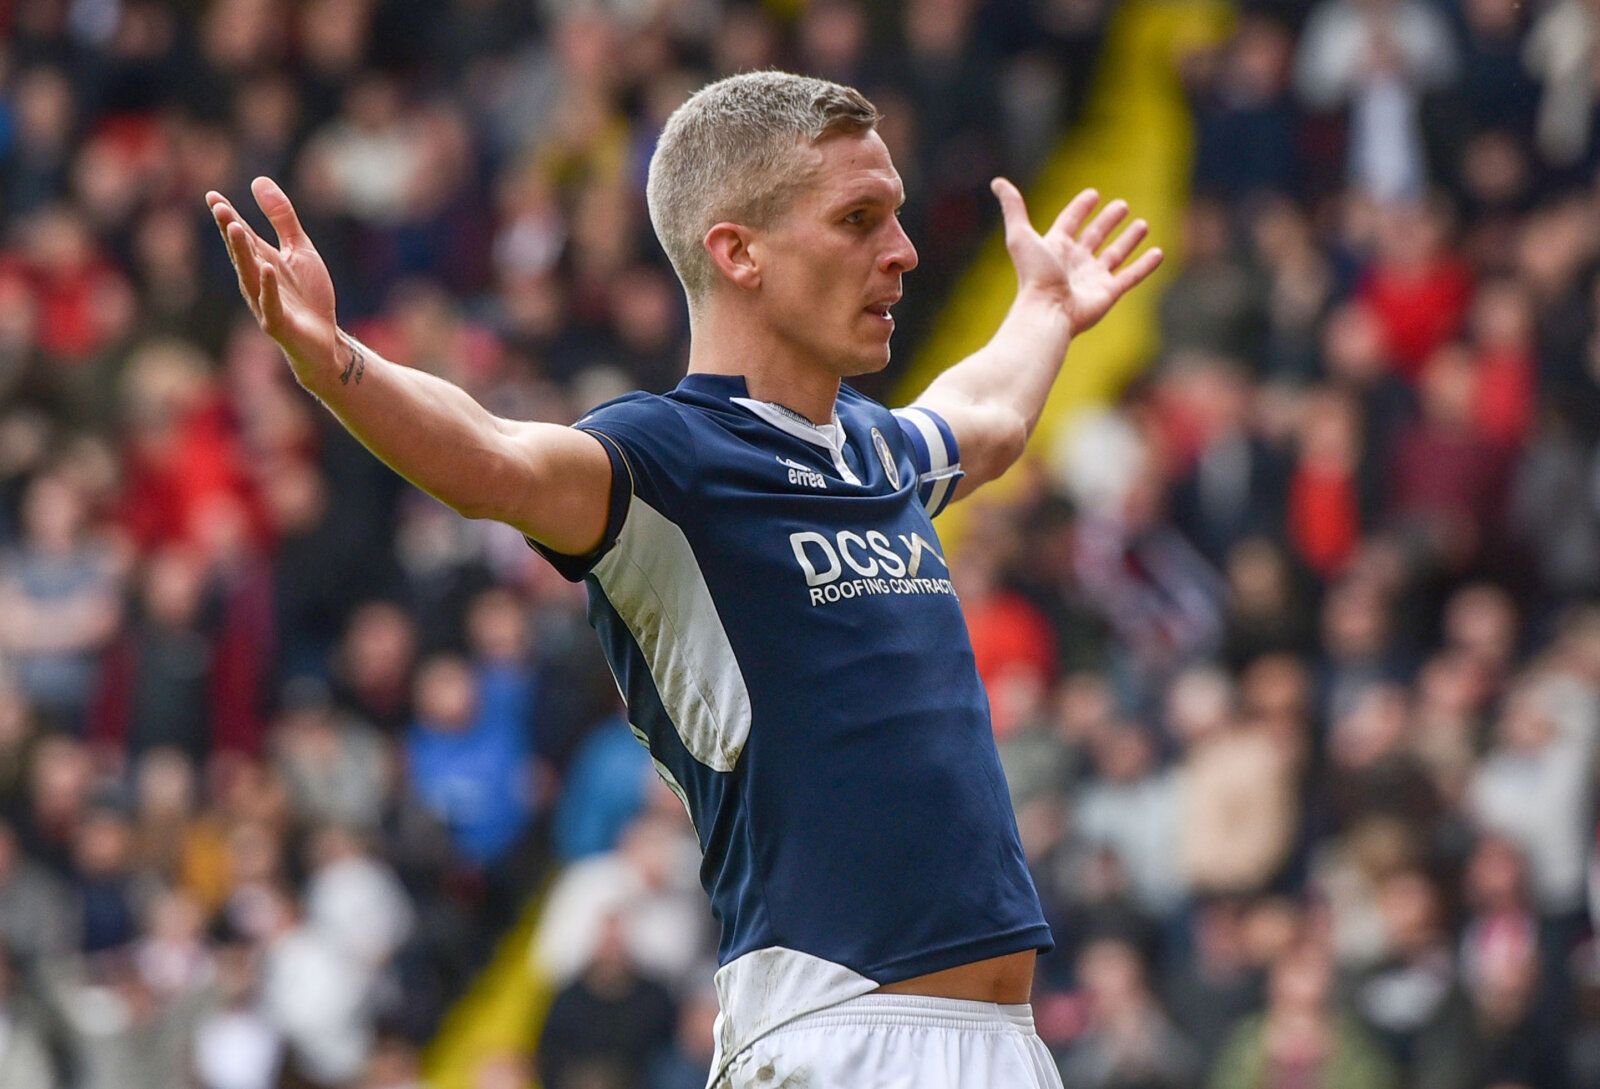 Soccer Football - Championship - Sheffield United vs Millwall - Bramall Lane, Sheffield, Britain - April 14, 2018   Millwall's Steve Morison celebrates scoring their first goal   Action Images/Paul Burrows    EDITORIAL USE ONLY. No use with unauthorized audio, video, data, fixture lists, club/league logos or 